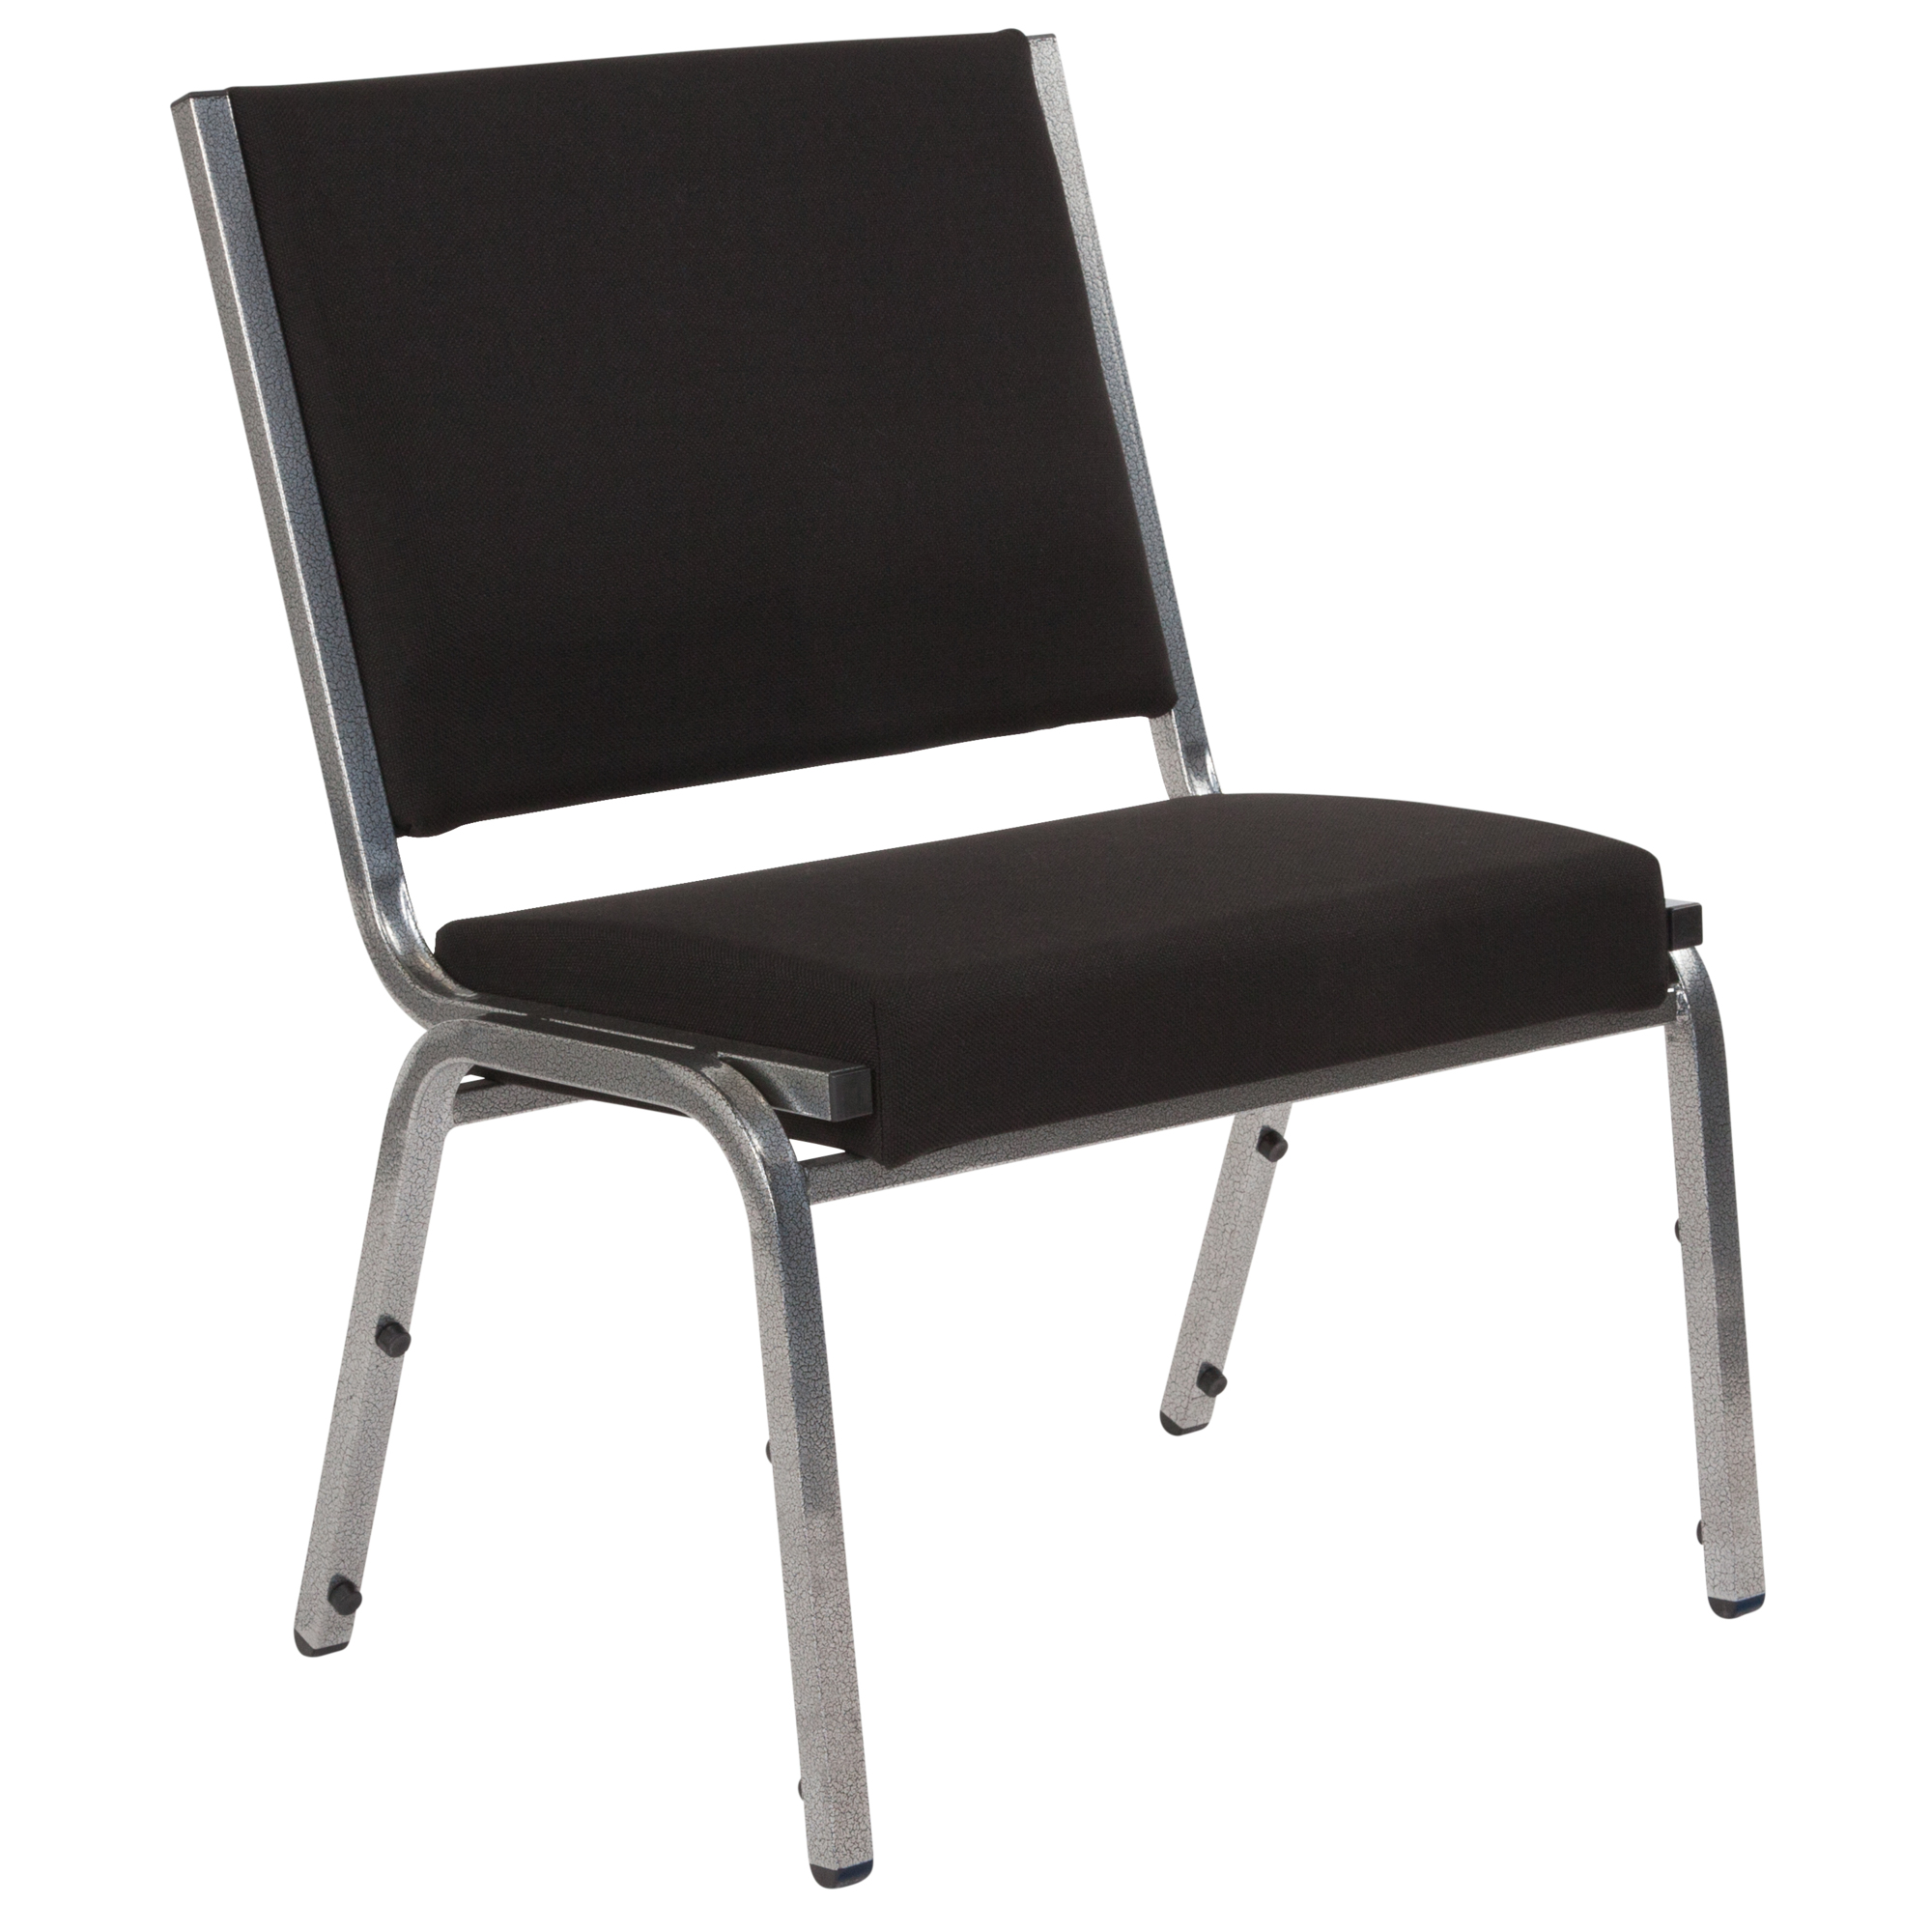 Flash Furniture, 1000 lb. Rated Black Fabric Bariatric Chair, Primary Color Black, Included (qty.) 1, Model XU604426601BK